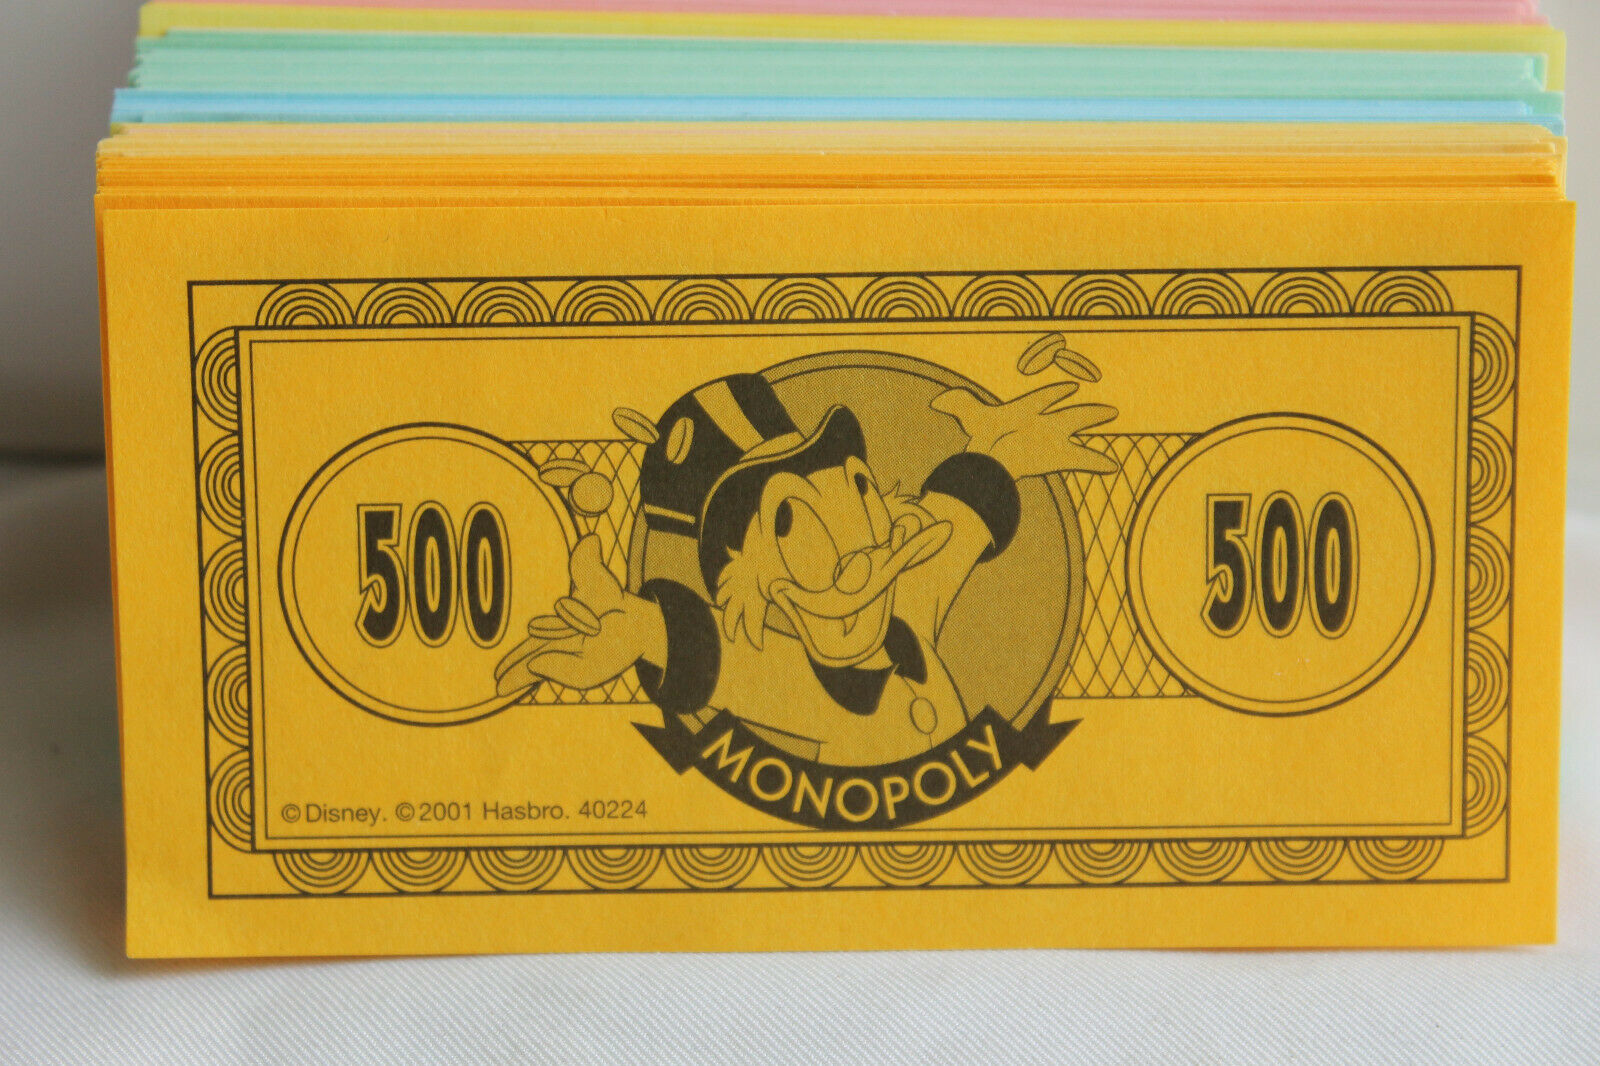 2009 Monopoly Disney Edition Factory Hasbro Parker Brothers for sale online 